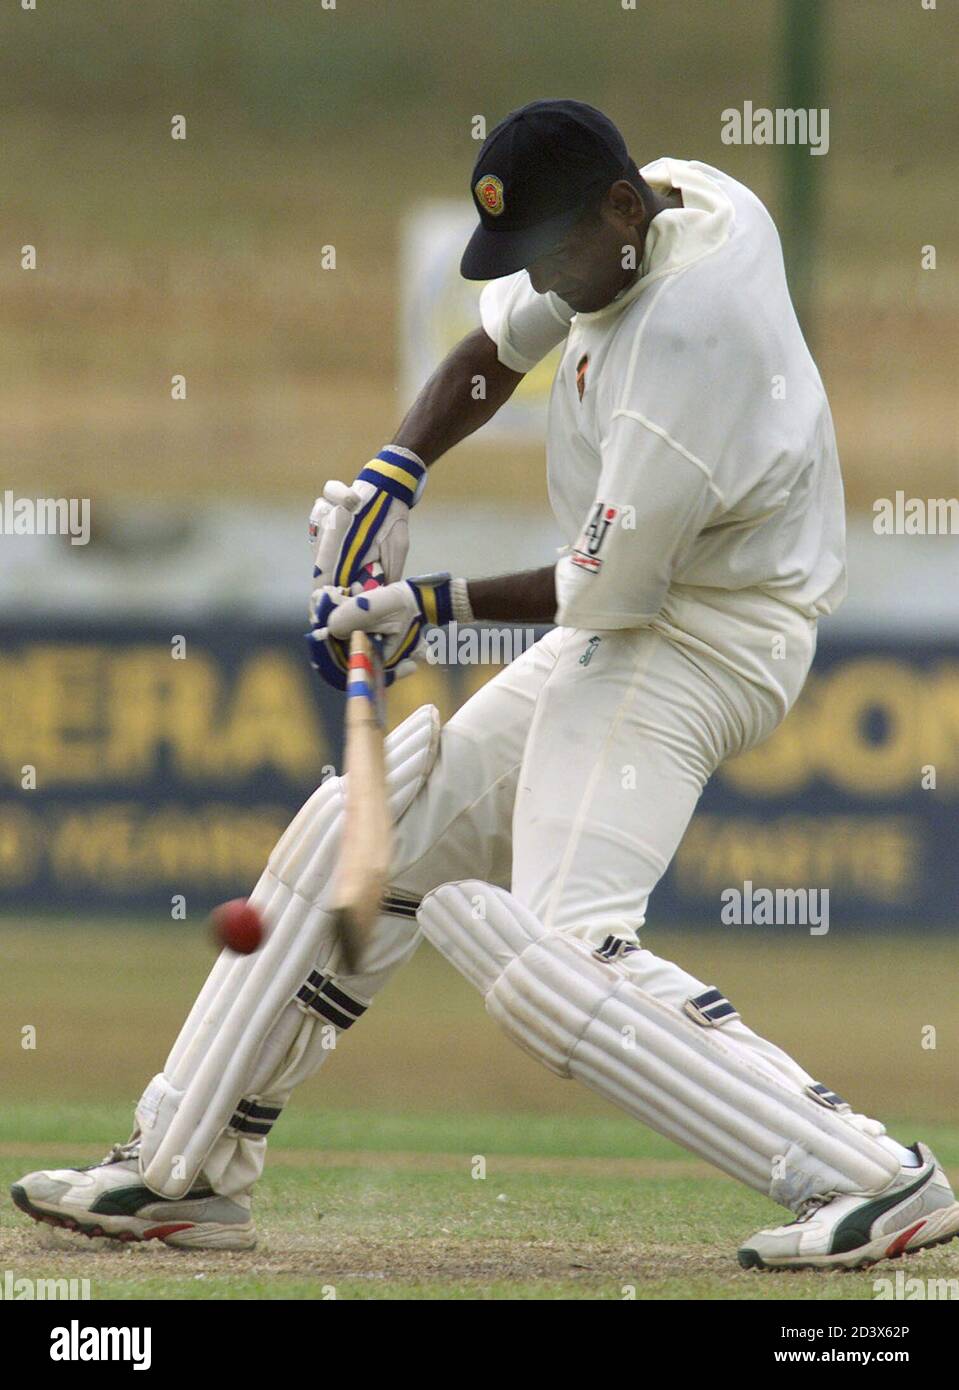 Sri Lankan batsman Naveed Nawas plays a shot during the third day of the second cricket test between Sri Lanka and Bangladesh at Singhalese Sports Club ground in Colombo, Sri Lanka on July 30, 2002. REUTERS/Anuruddha Lokuhapuarachchi  AL/CP Stock Photo